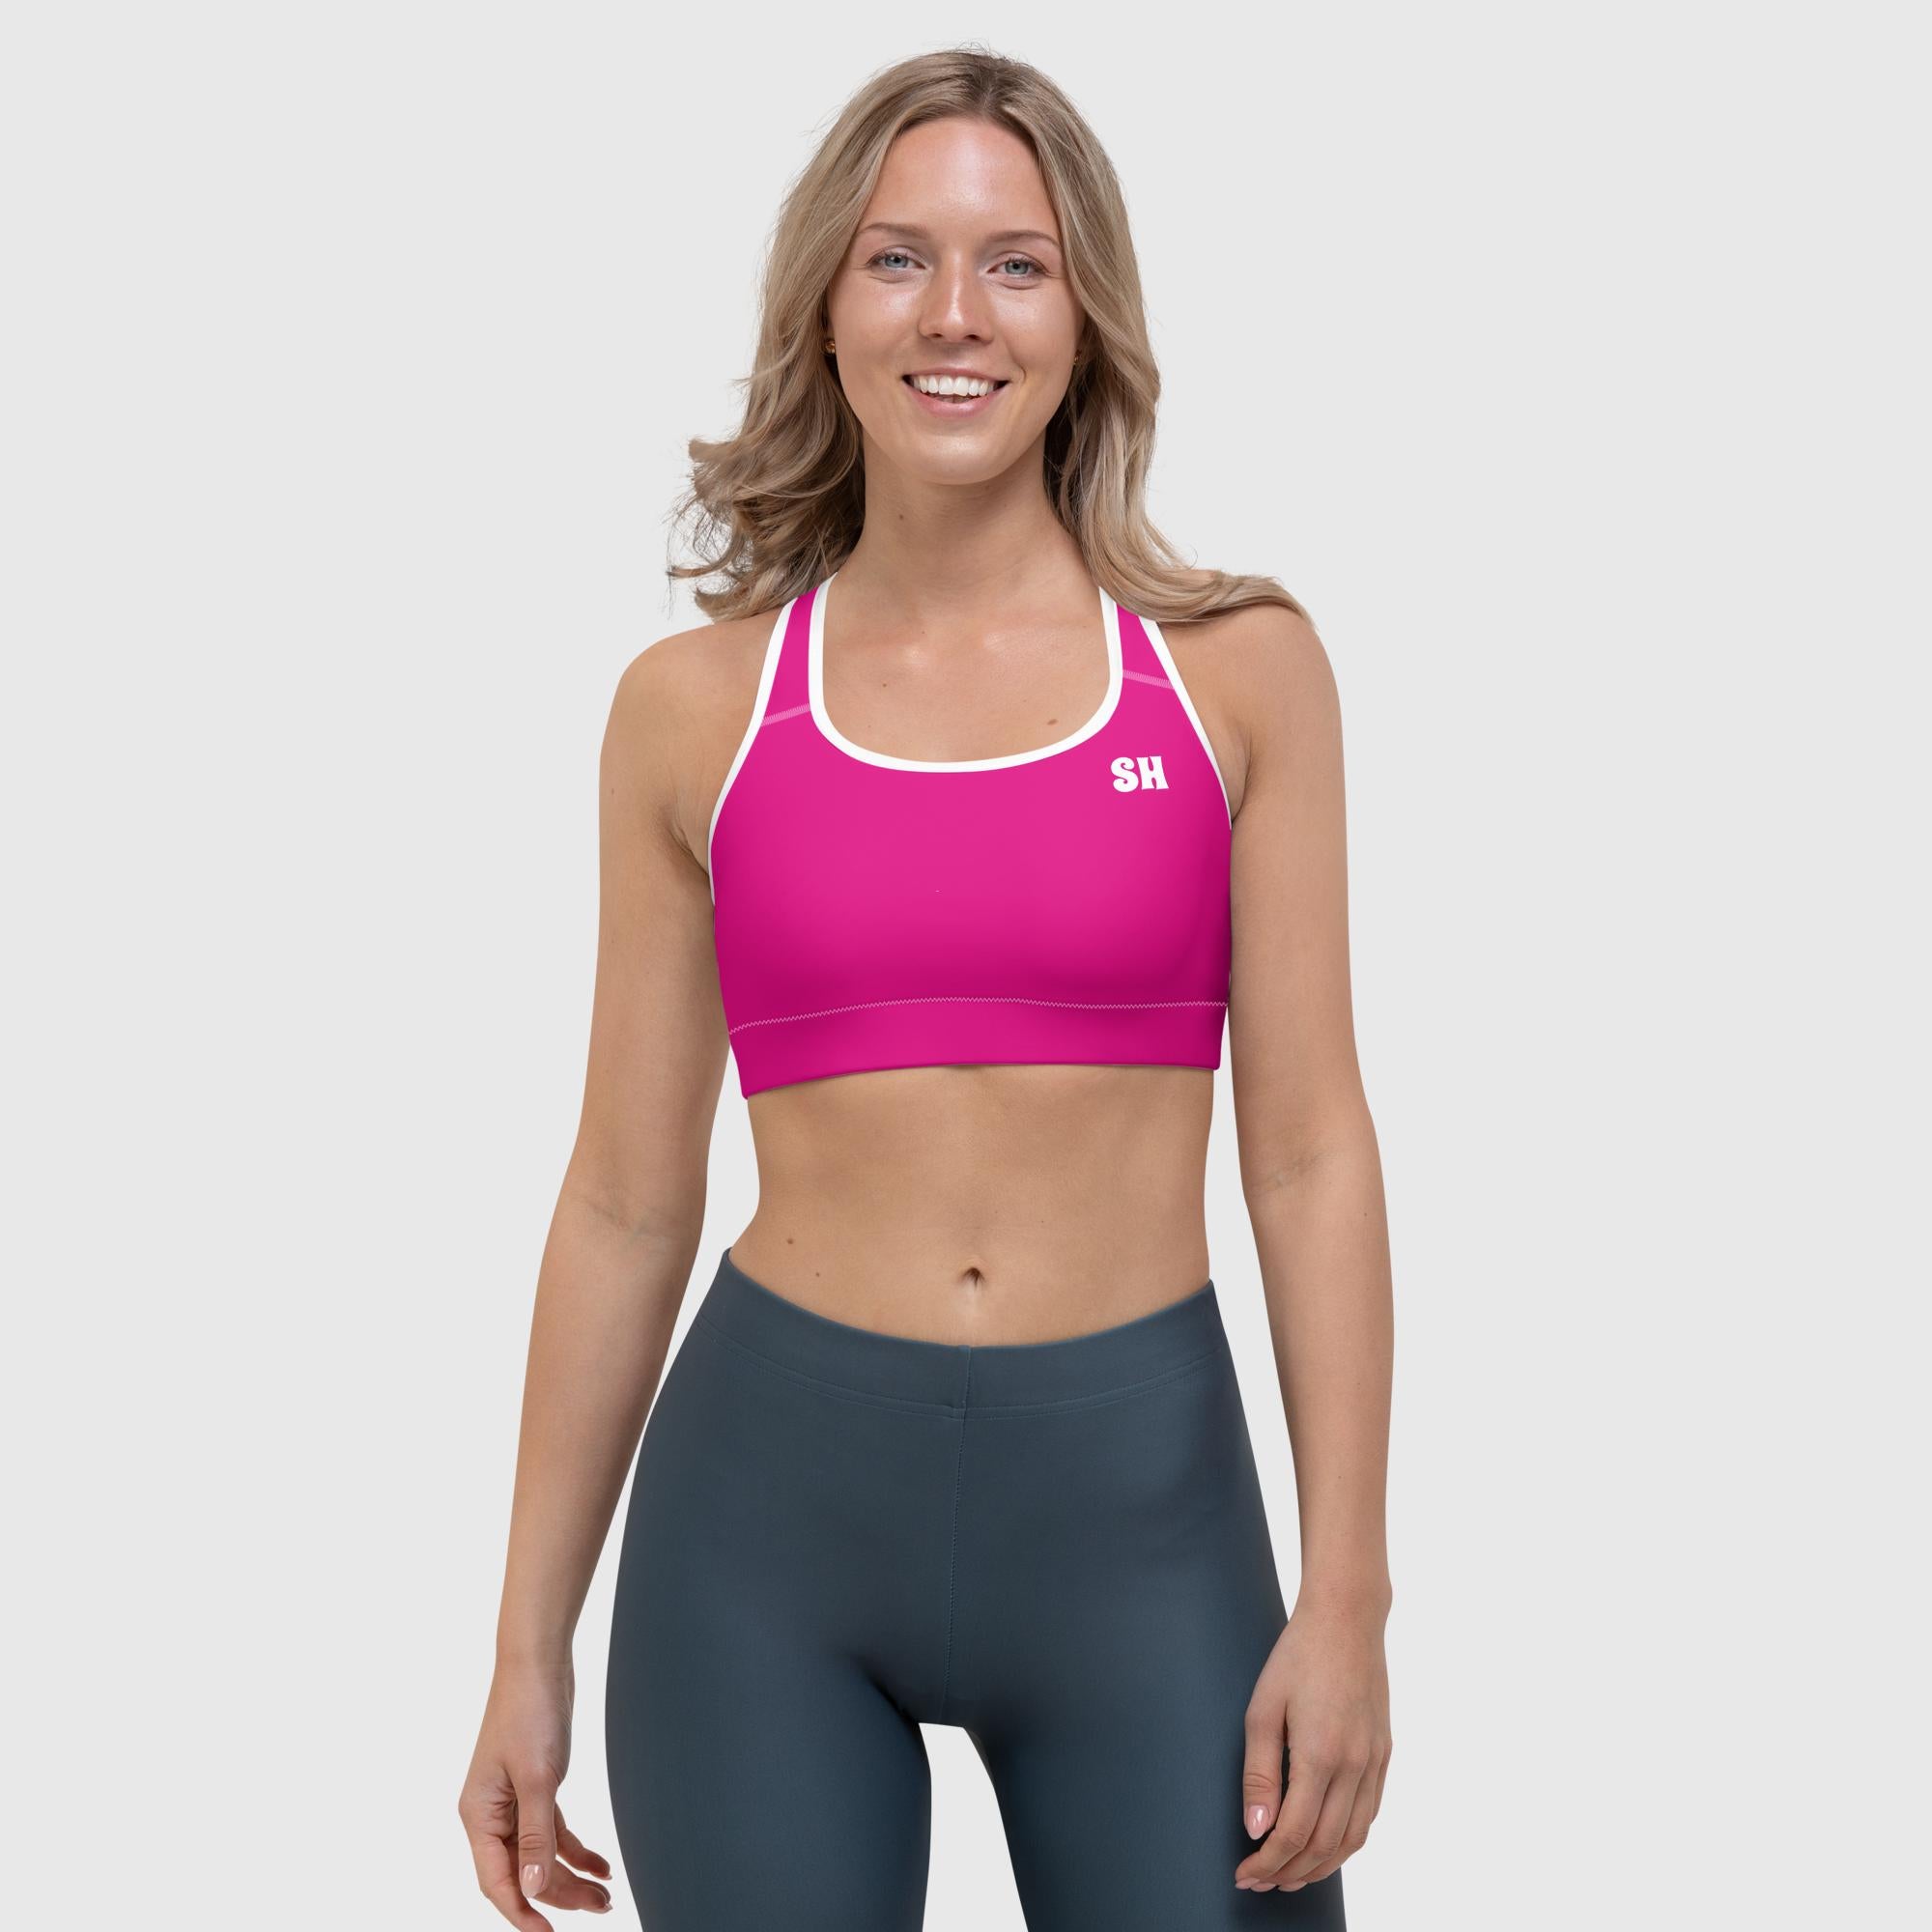 Oceans Apart sports bra Size S Wear and Smile hey Sunshine!